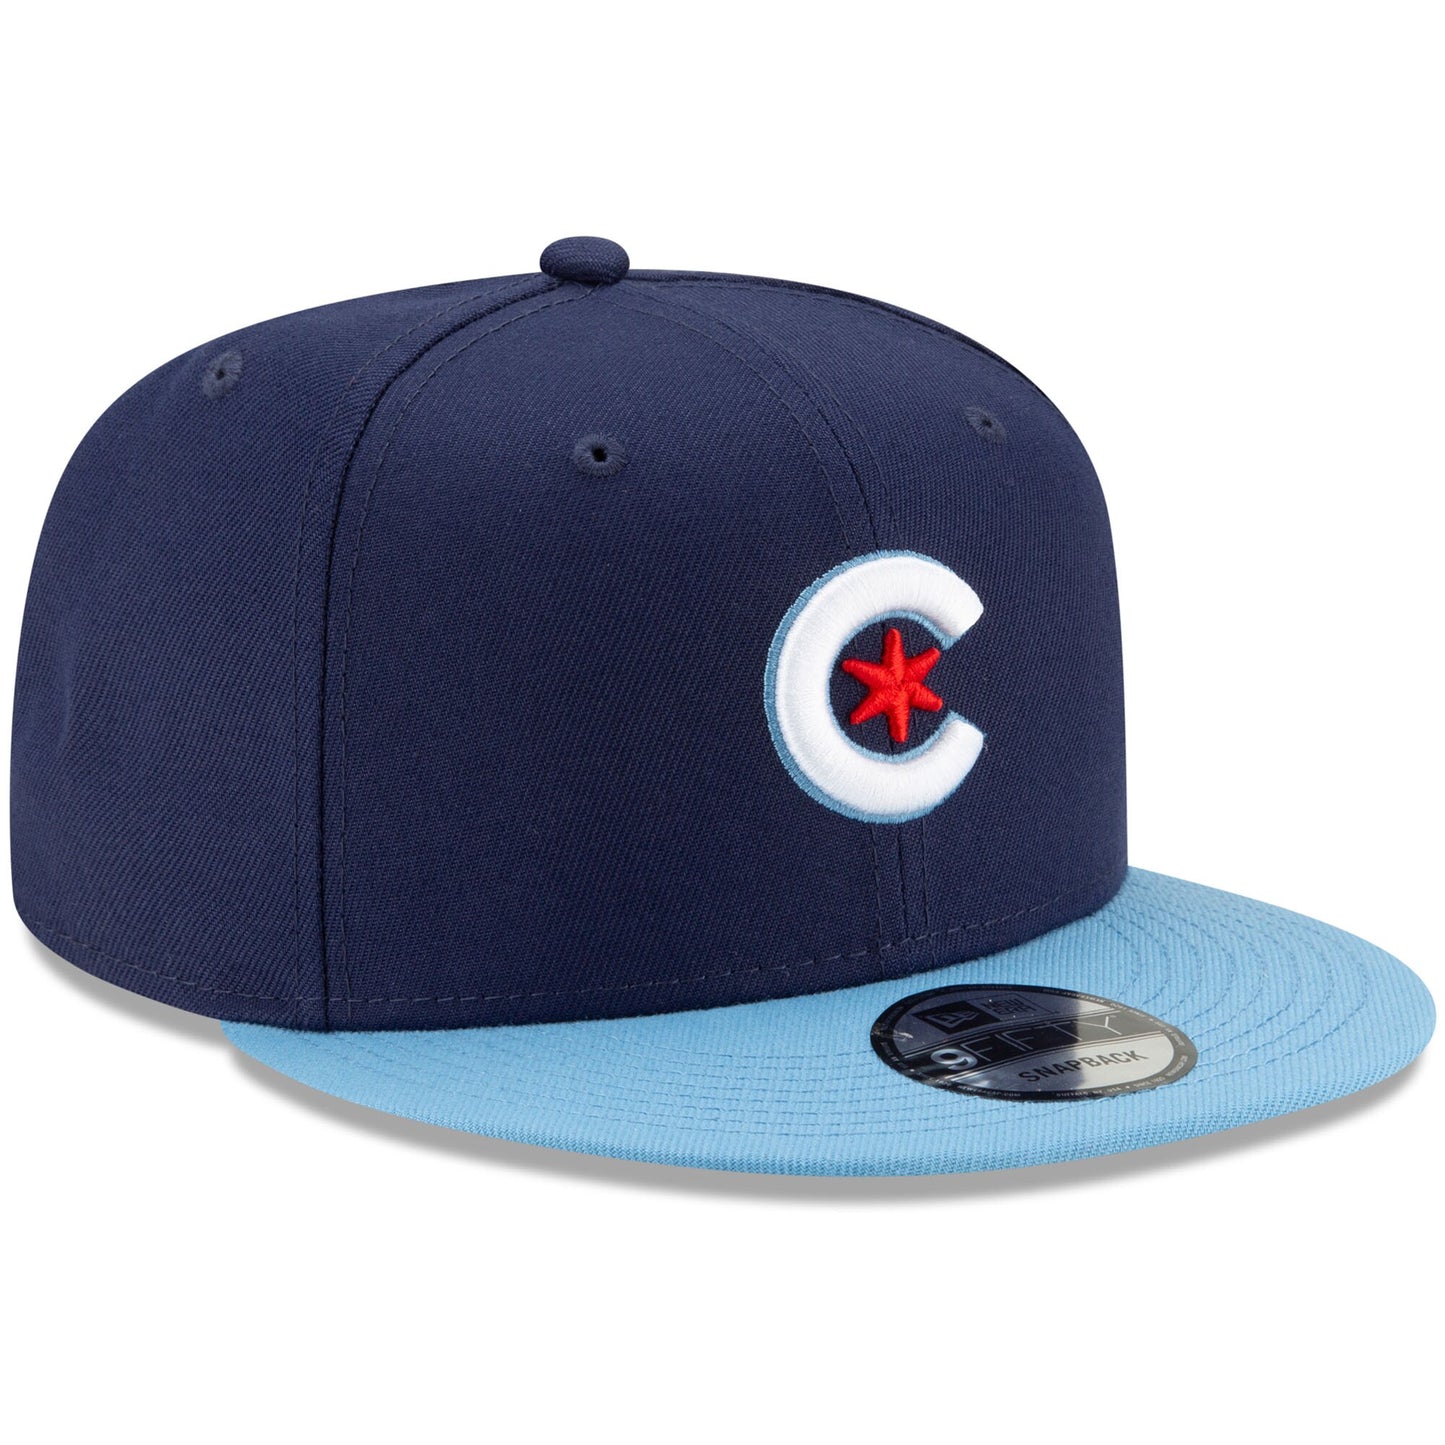 Men's Chicago Cubs New Era Navy/Light Blue City Connect 9FIFTY Snapback Adjustable Hat